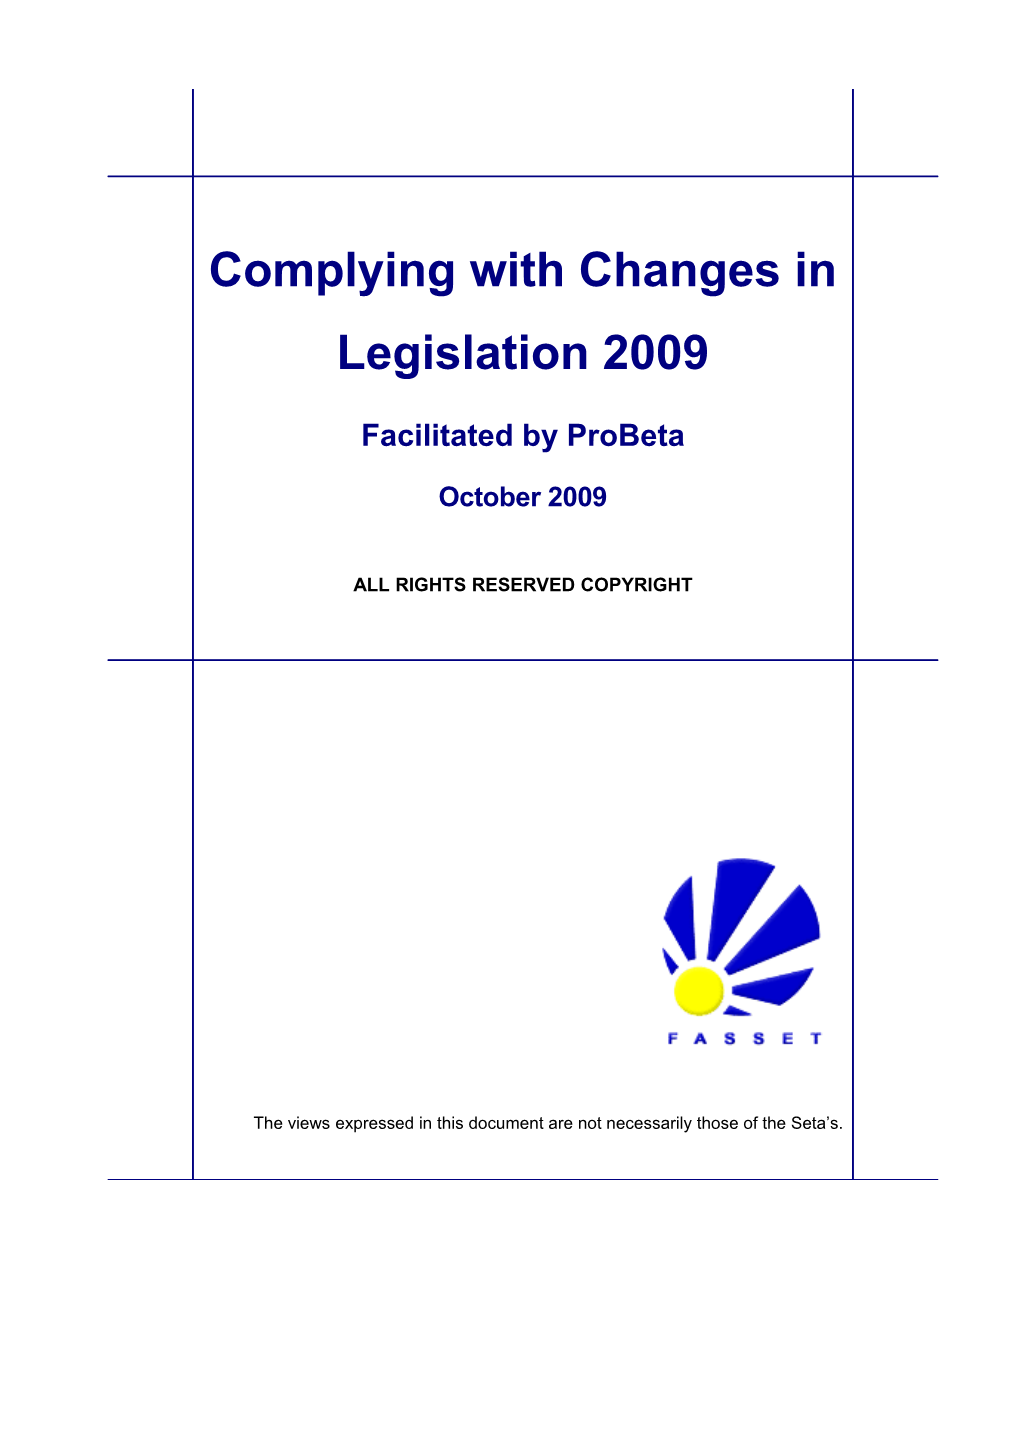 Complying with Changes in Legislation